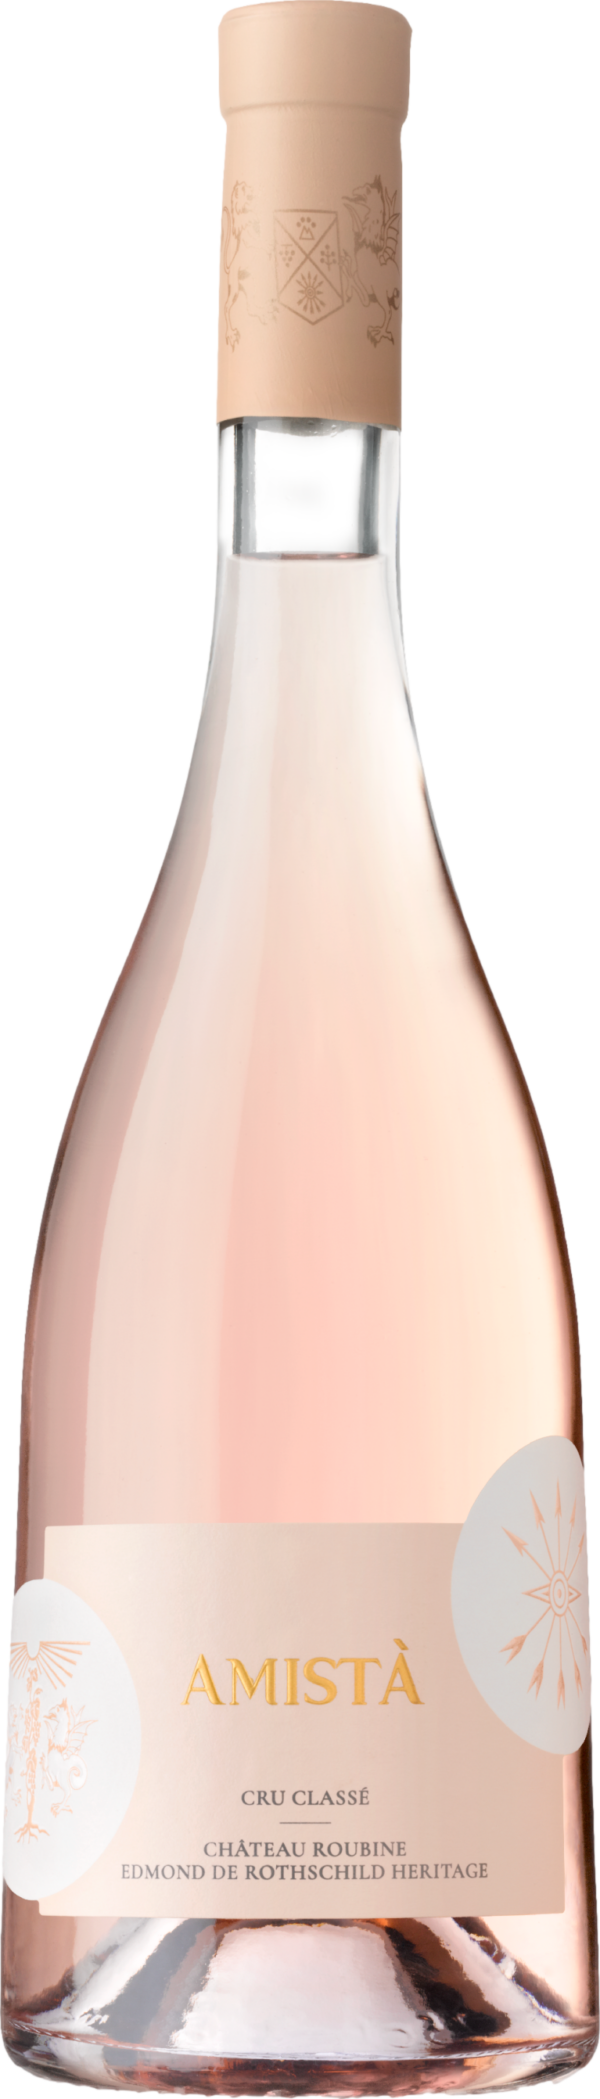 Product image of Edmond de Rothschild Chateau Roubine Amista Cru Classe Rose 2023 from 8wines